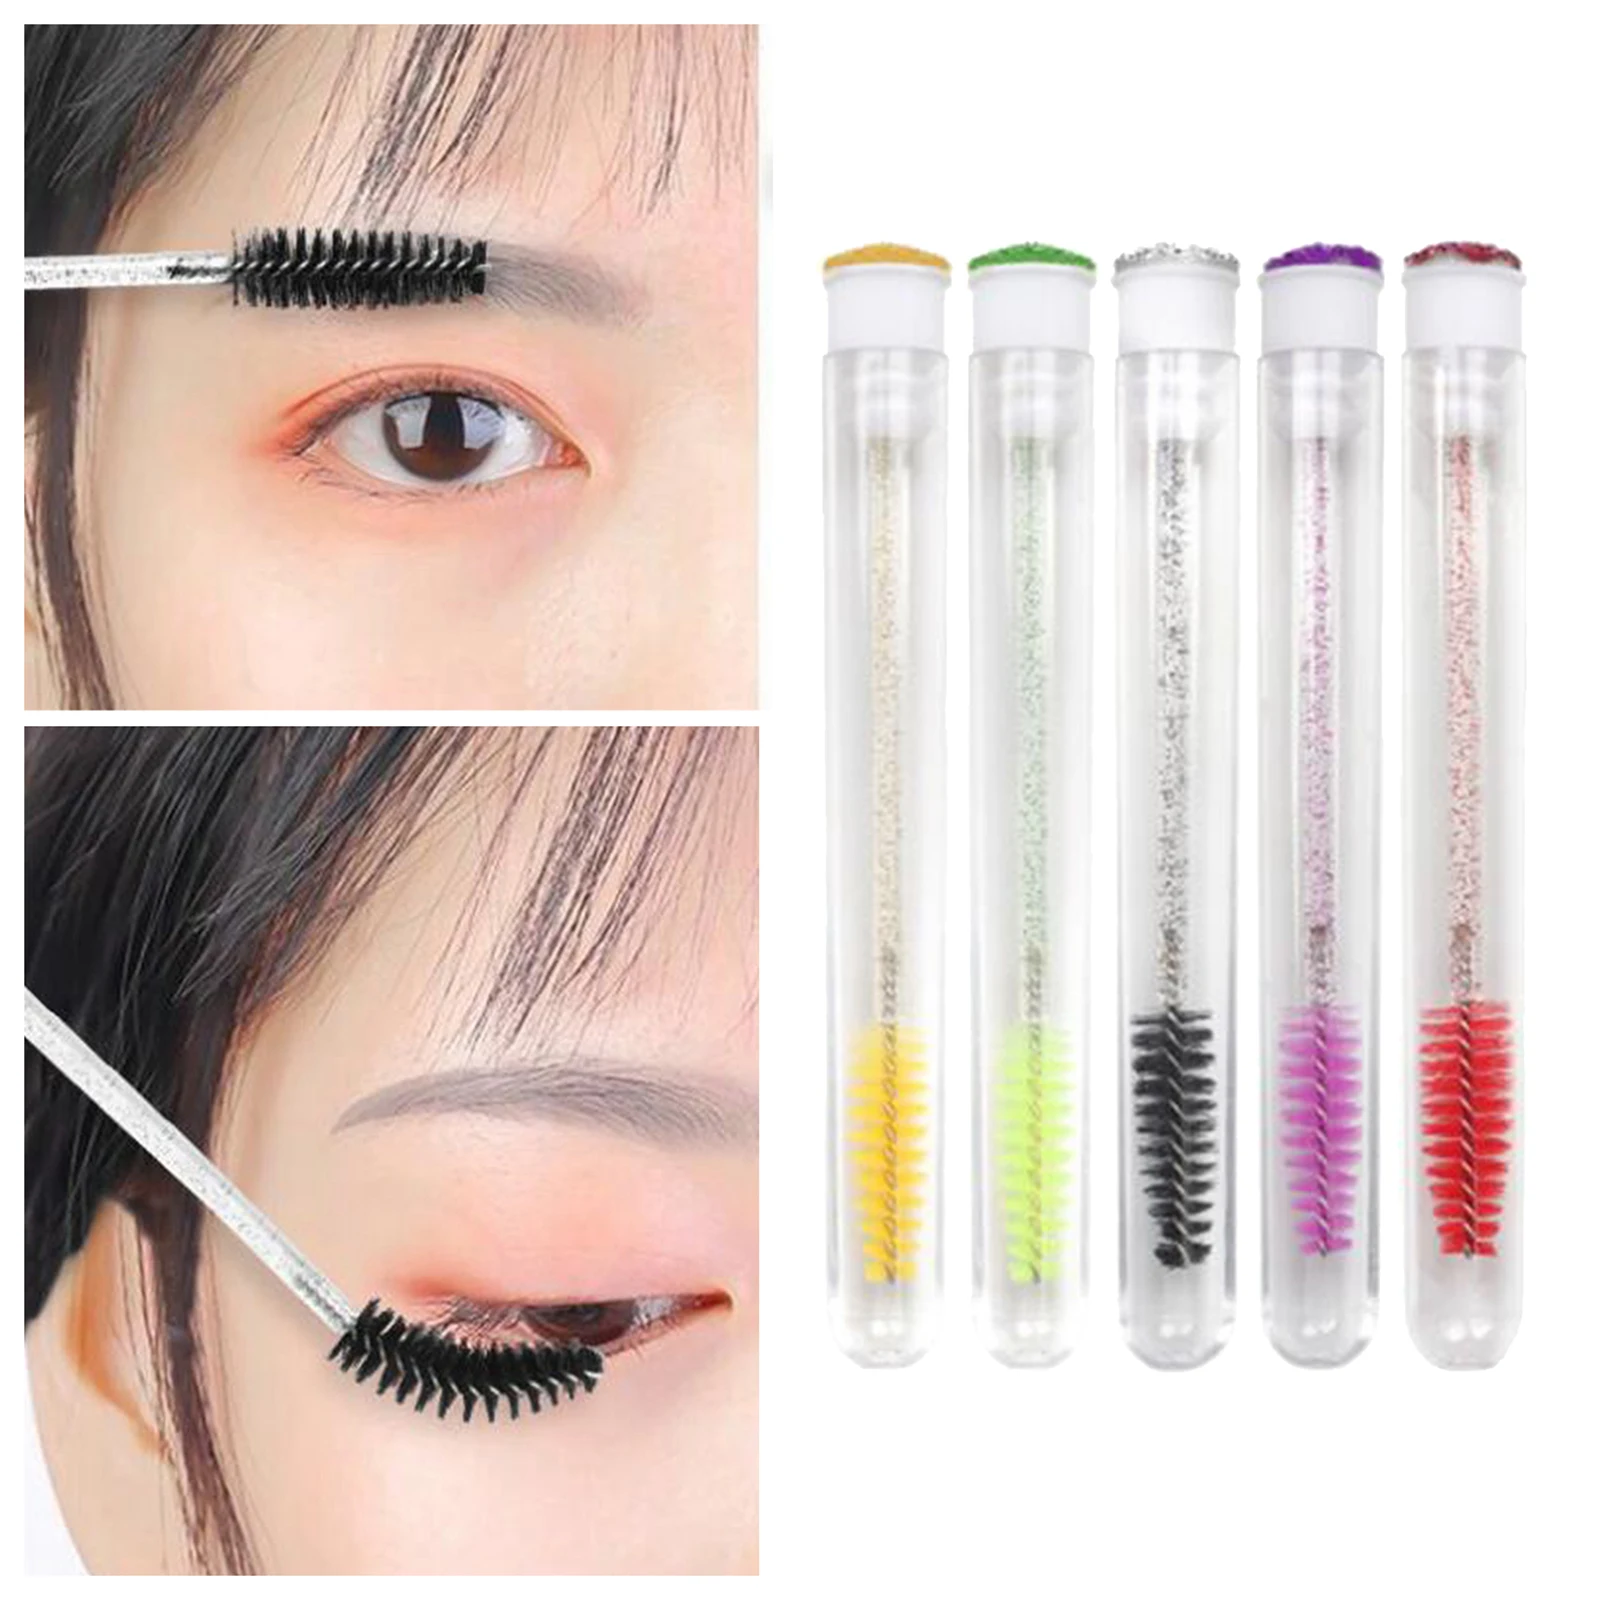 5Pcs Disposable Mascara Wand Tube Clear Eyelash Tube Eyelash Makeup Brush Tool for Eyelash Eyelash Extension Supplies For Home And Travel